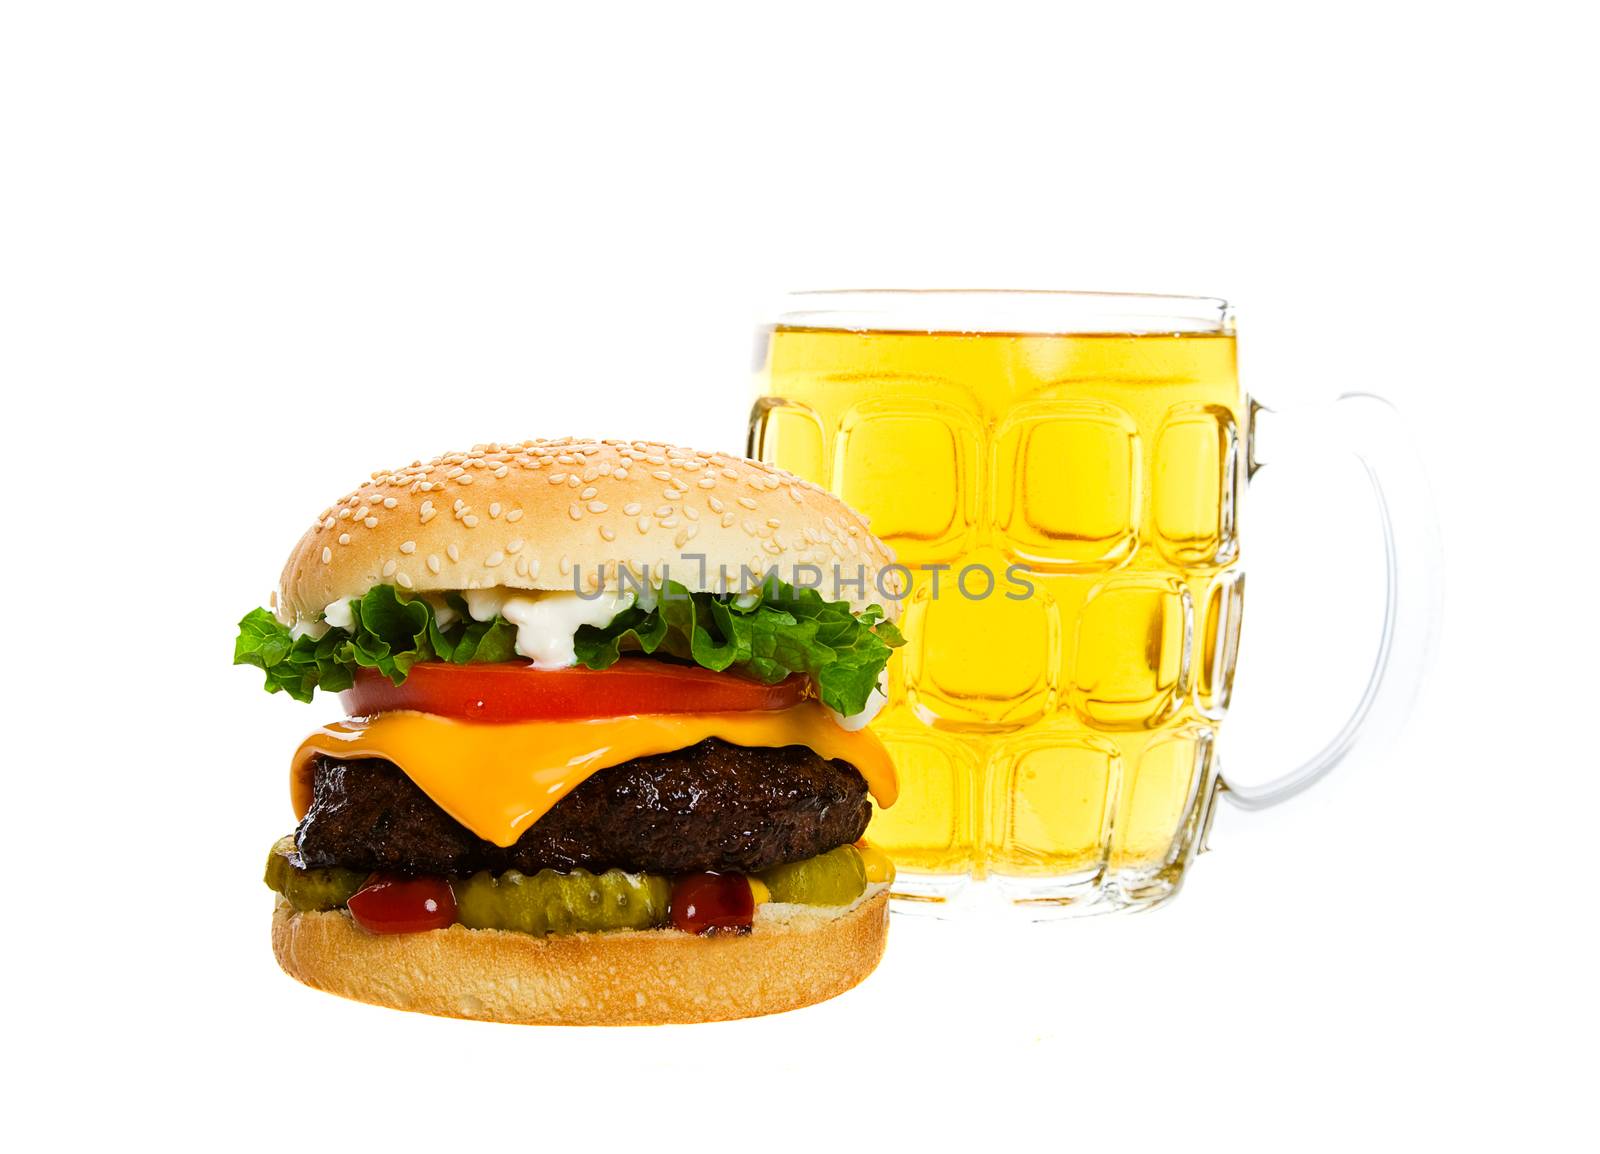 Juicy Angus beef burger topped with cheese, tomatoes & lettuce on a golden sesame seed bun along with a thirst quenching mug of beer.  Shot on white background.